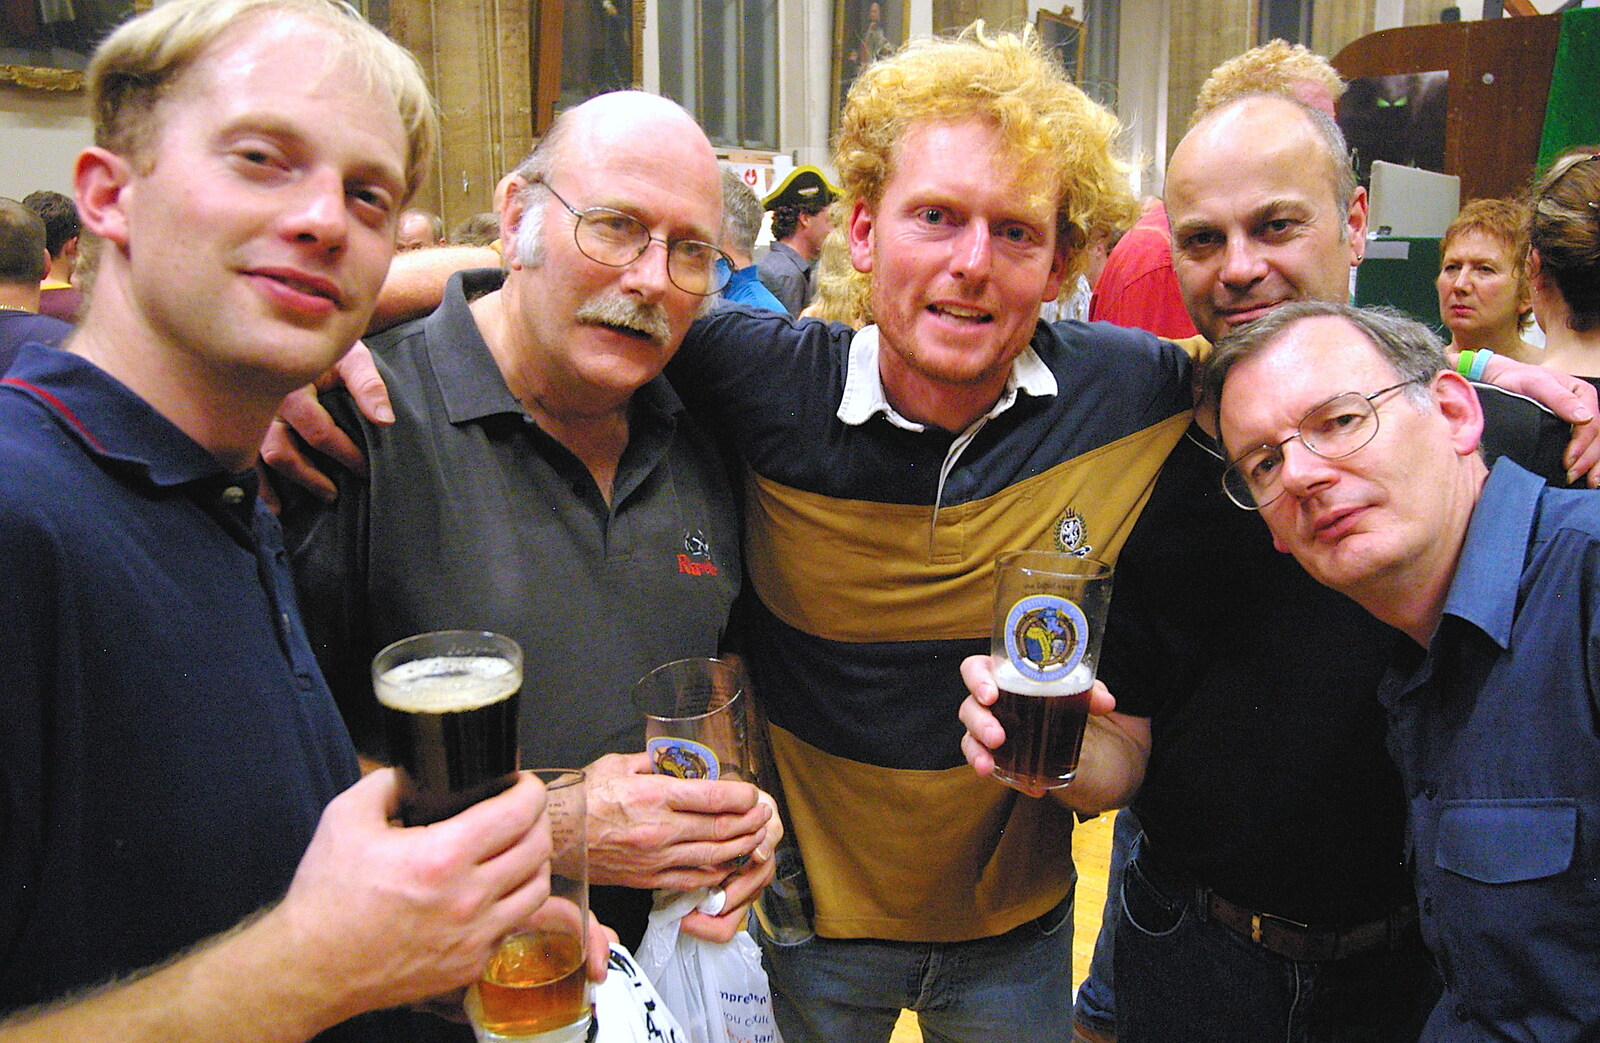 Paul, Bindery Dave, Wavy, Twiglet Carl and Ping-Pong Peter from The 28th Norwich Beer Festival, St. Andrew's Hall, Norwich - 26th October 2005